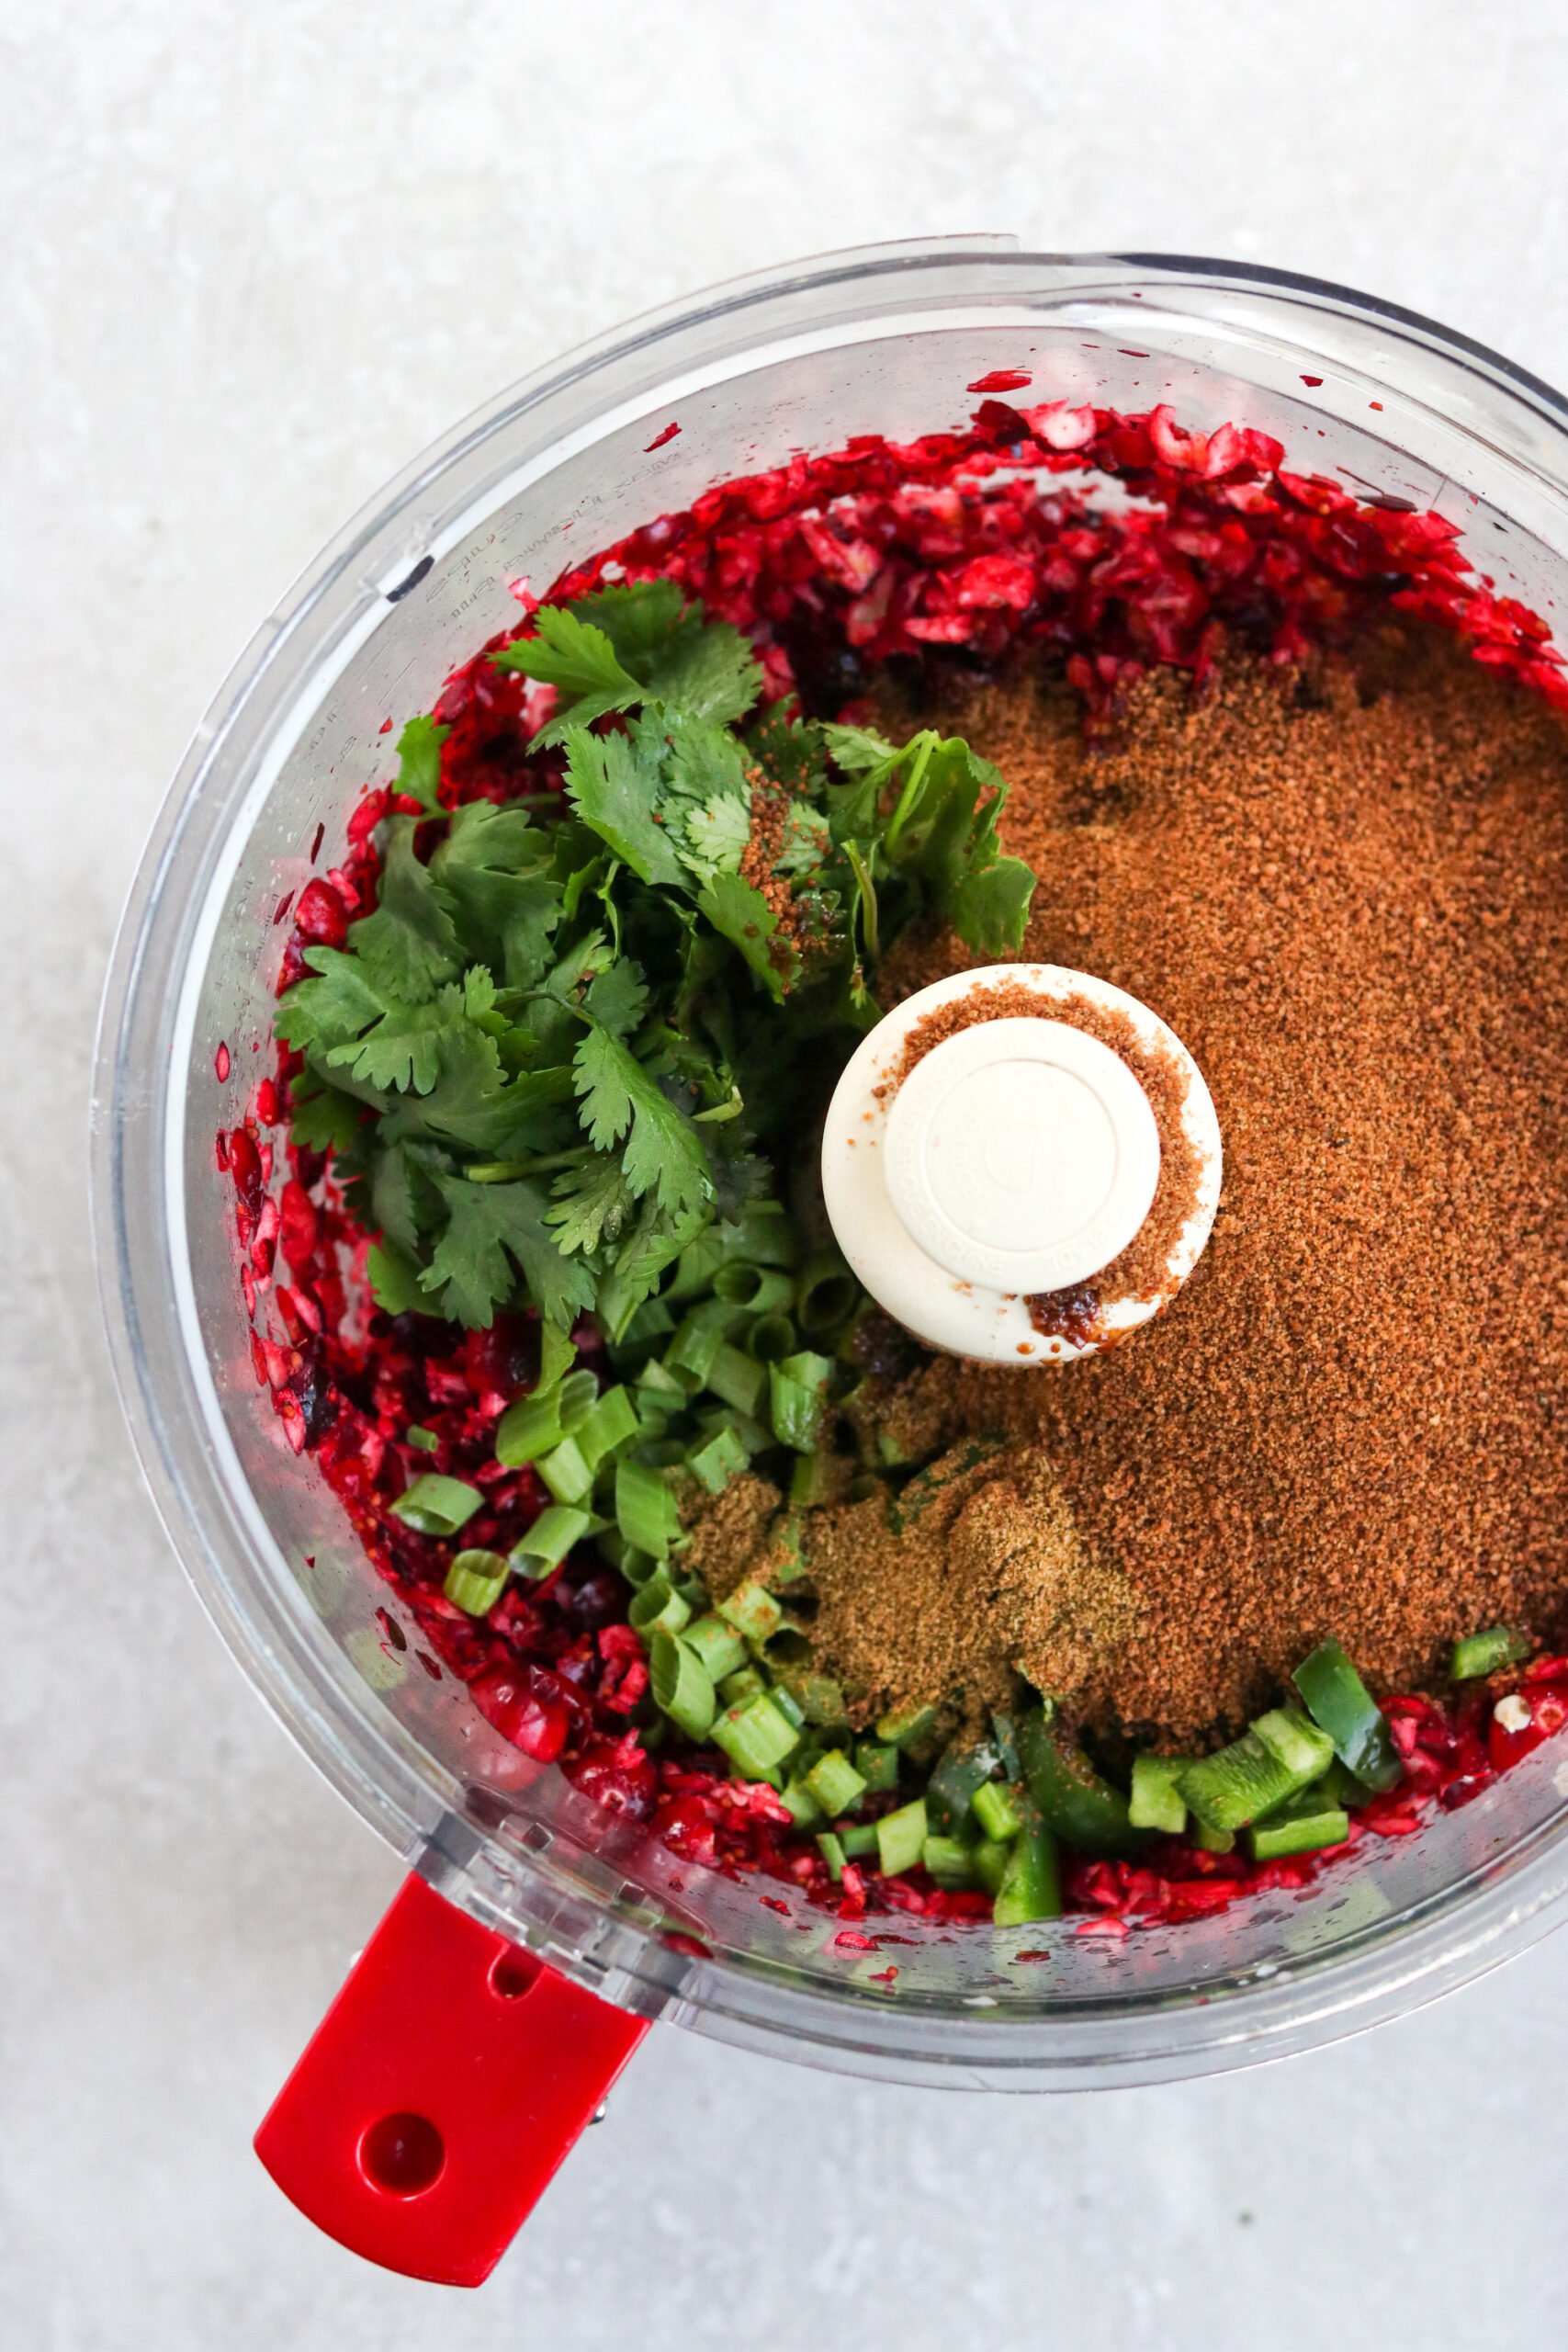 how to mix all the cranberry jalapeño dip ingredients in the food processor